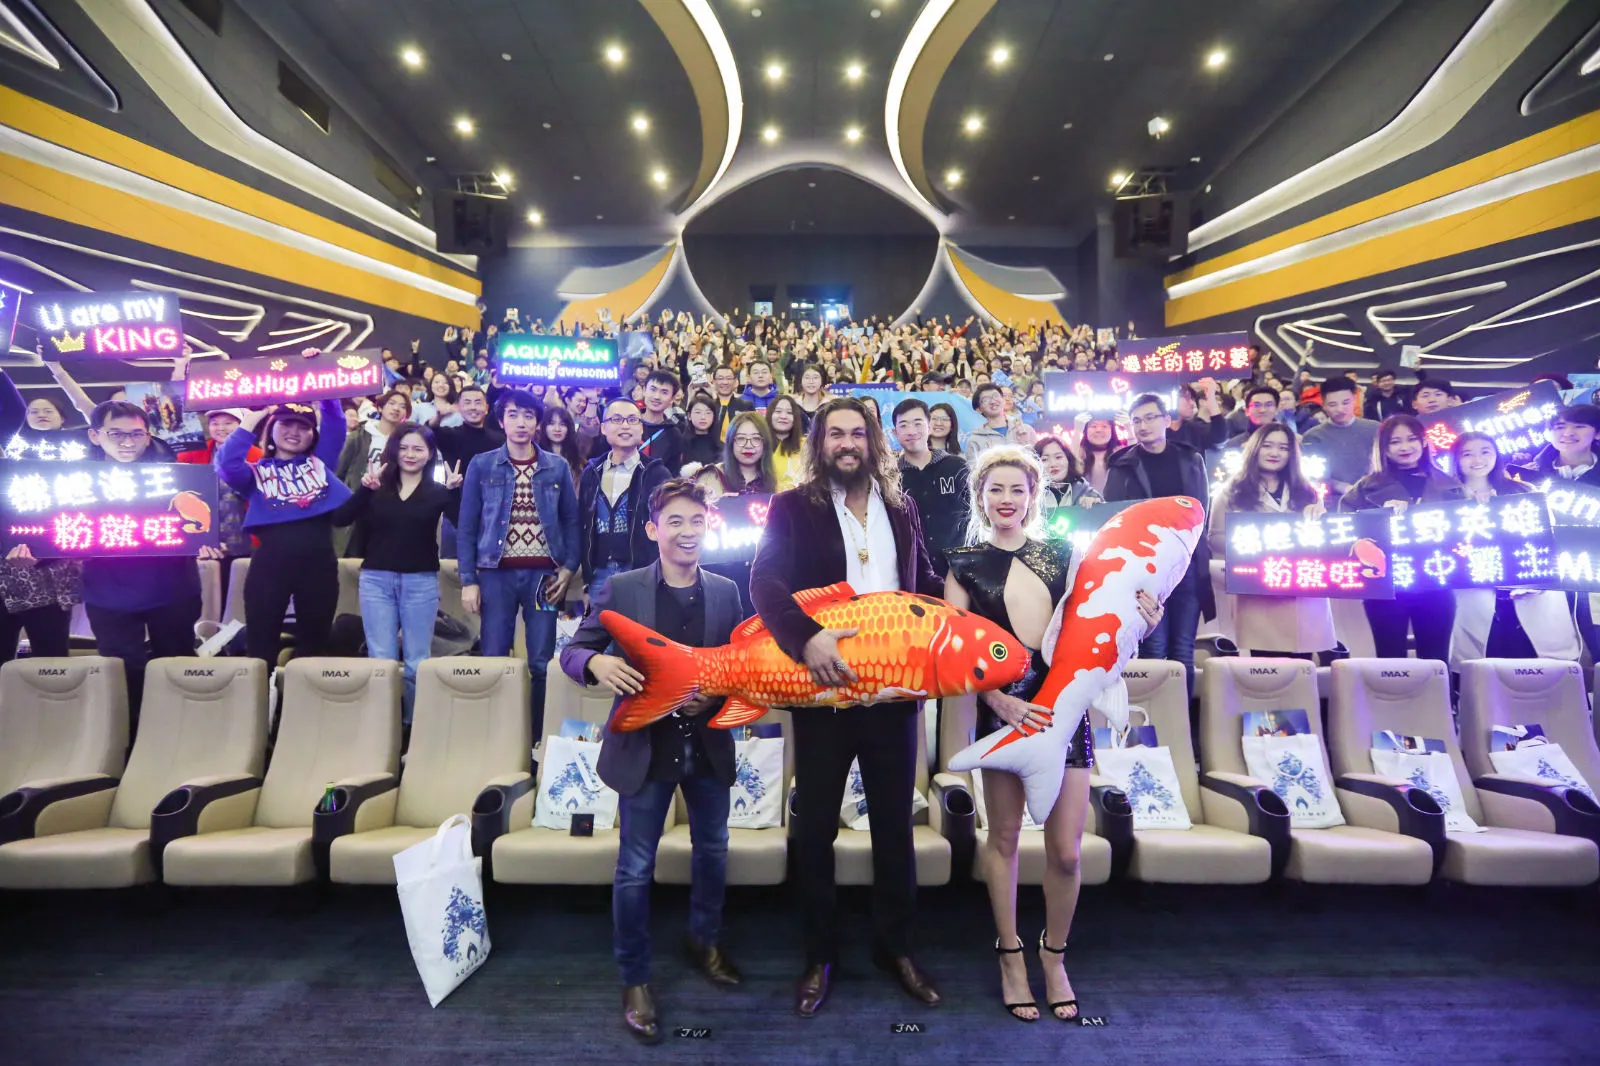 James Wan, Jason and amber cuddle giant koi with fans. JPG